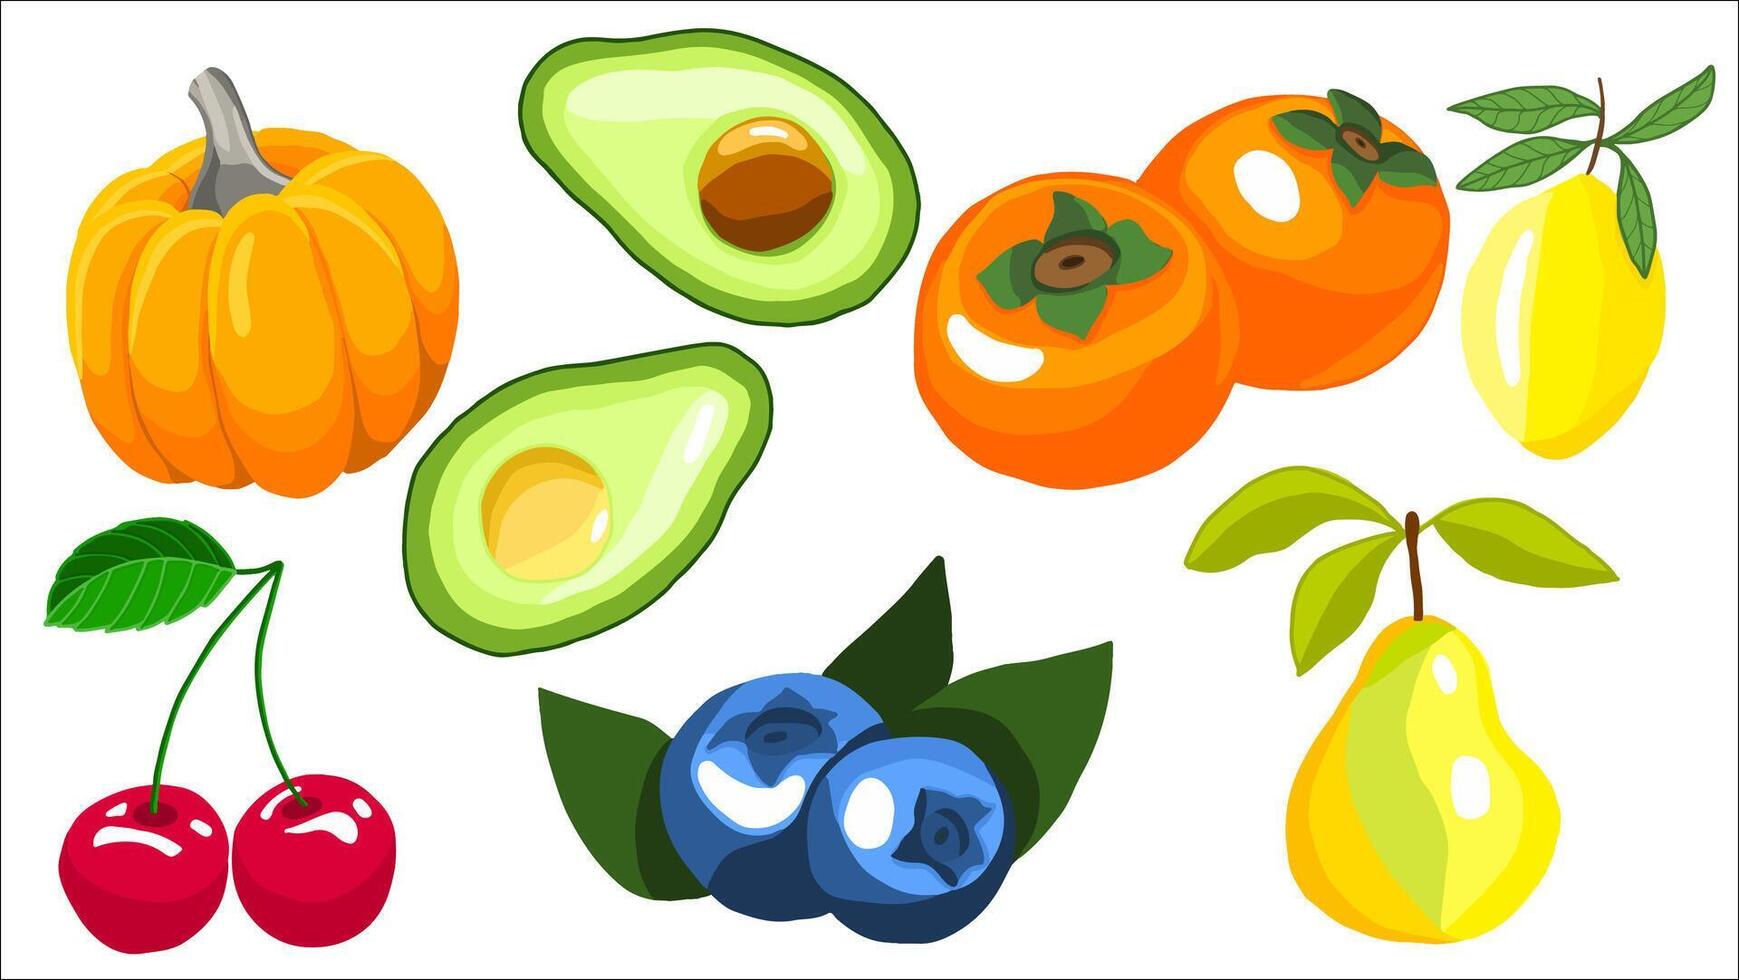 Assorted Fresh Fruits and Vegetables Illustration Featuring Pumpkin, Avocados, and Berries vector